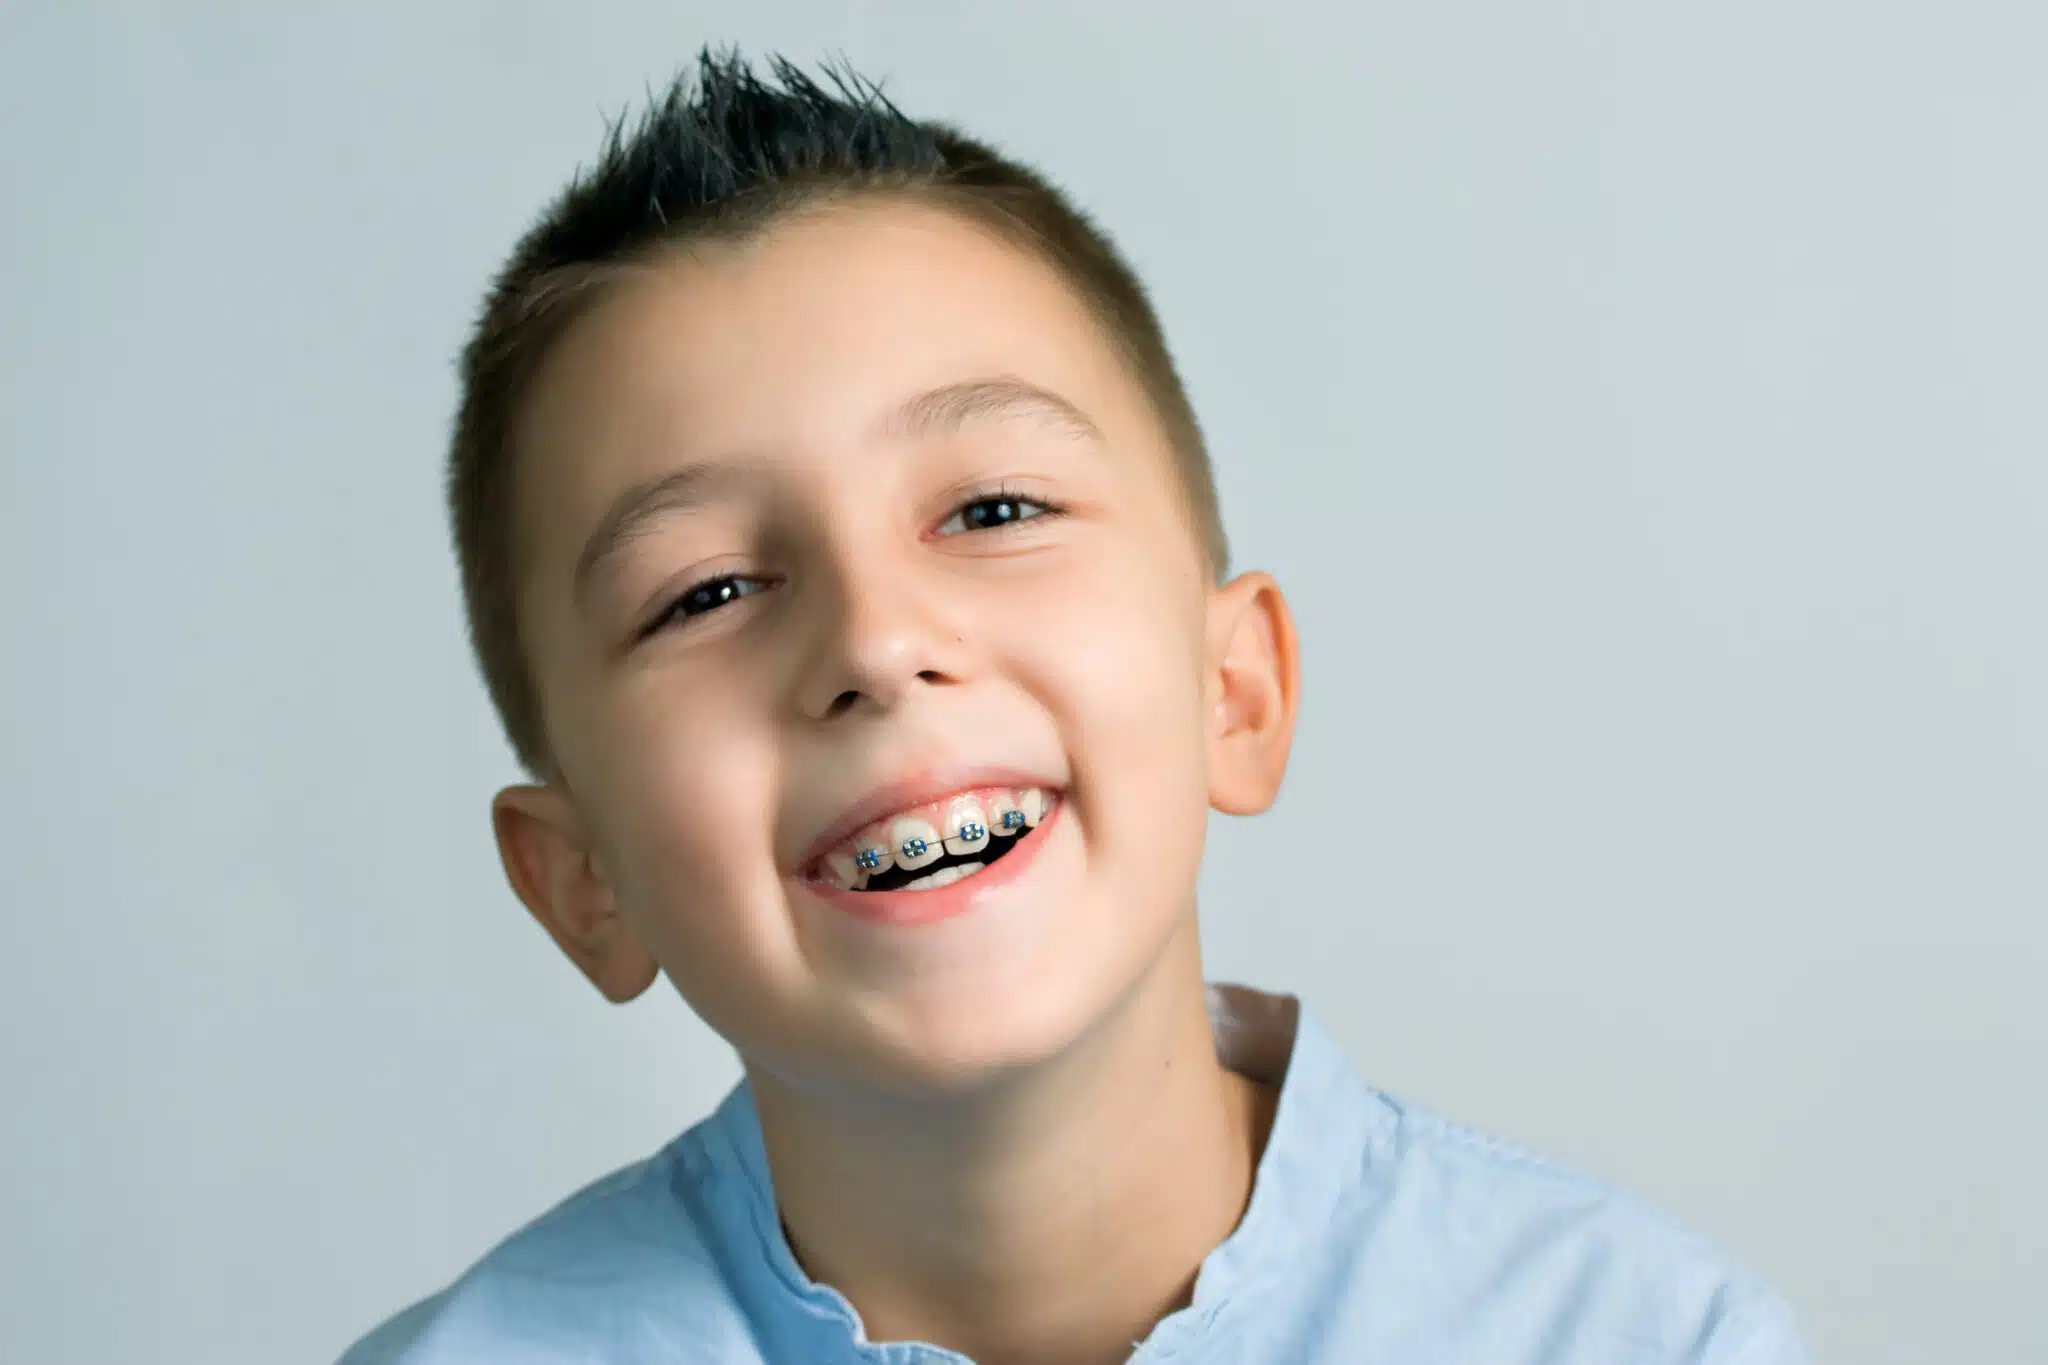 6 Tips for Keeping Your Braces Clean from Dunegan Orthodontics!